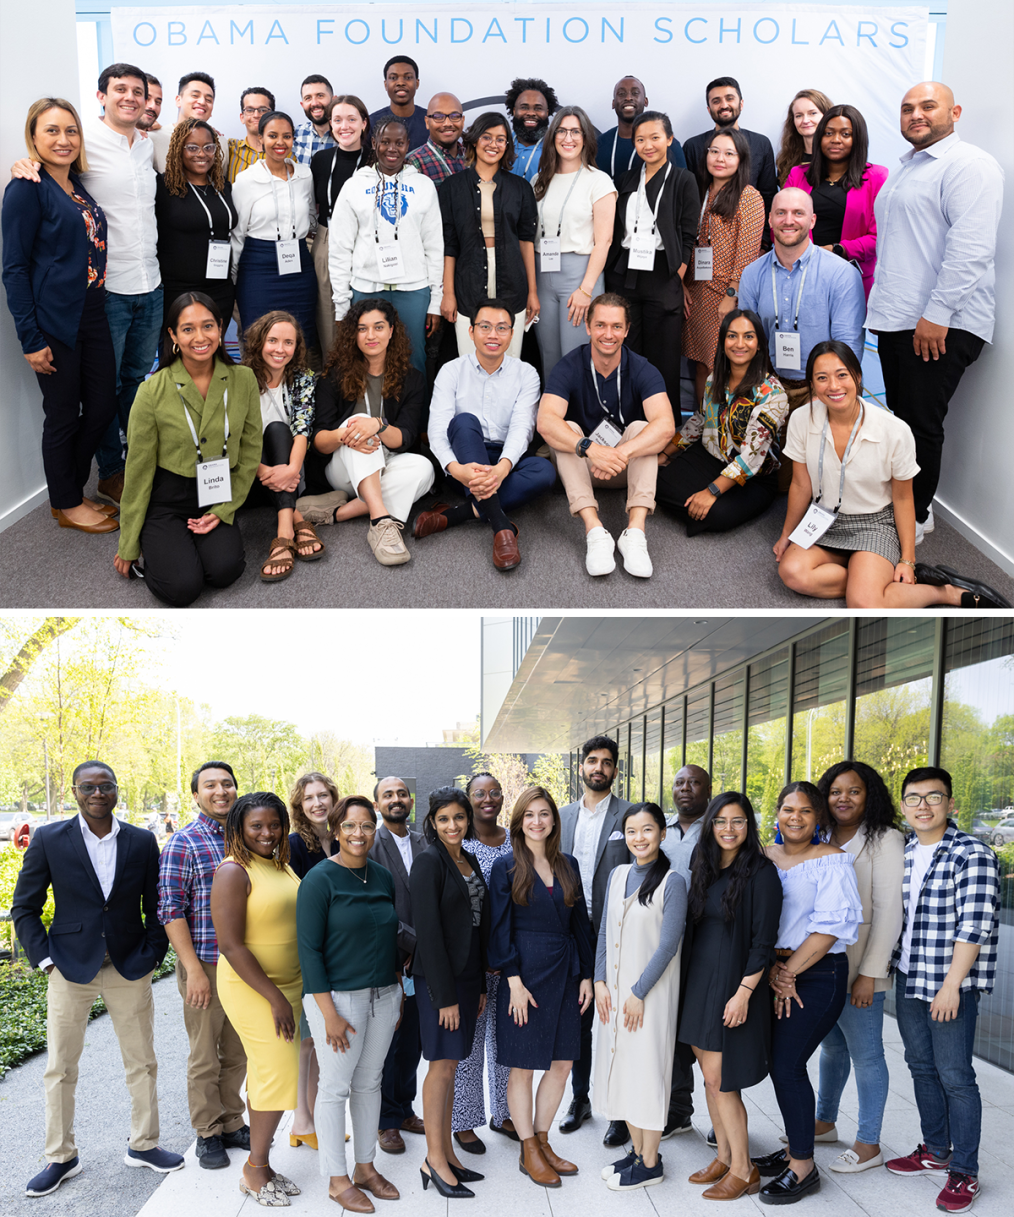 A collage with two photos. Both photos include a group of individuals of a variety of skin tones in professional attire. 